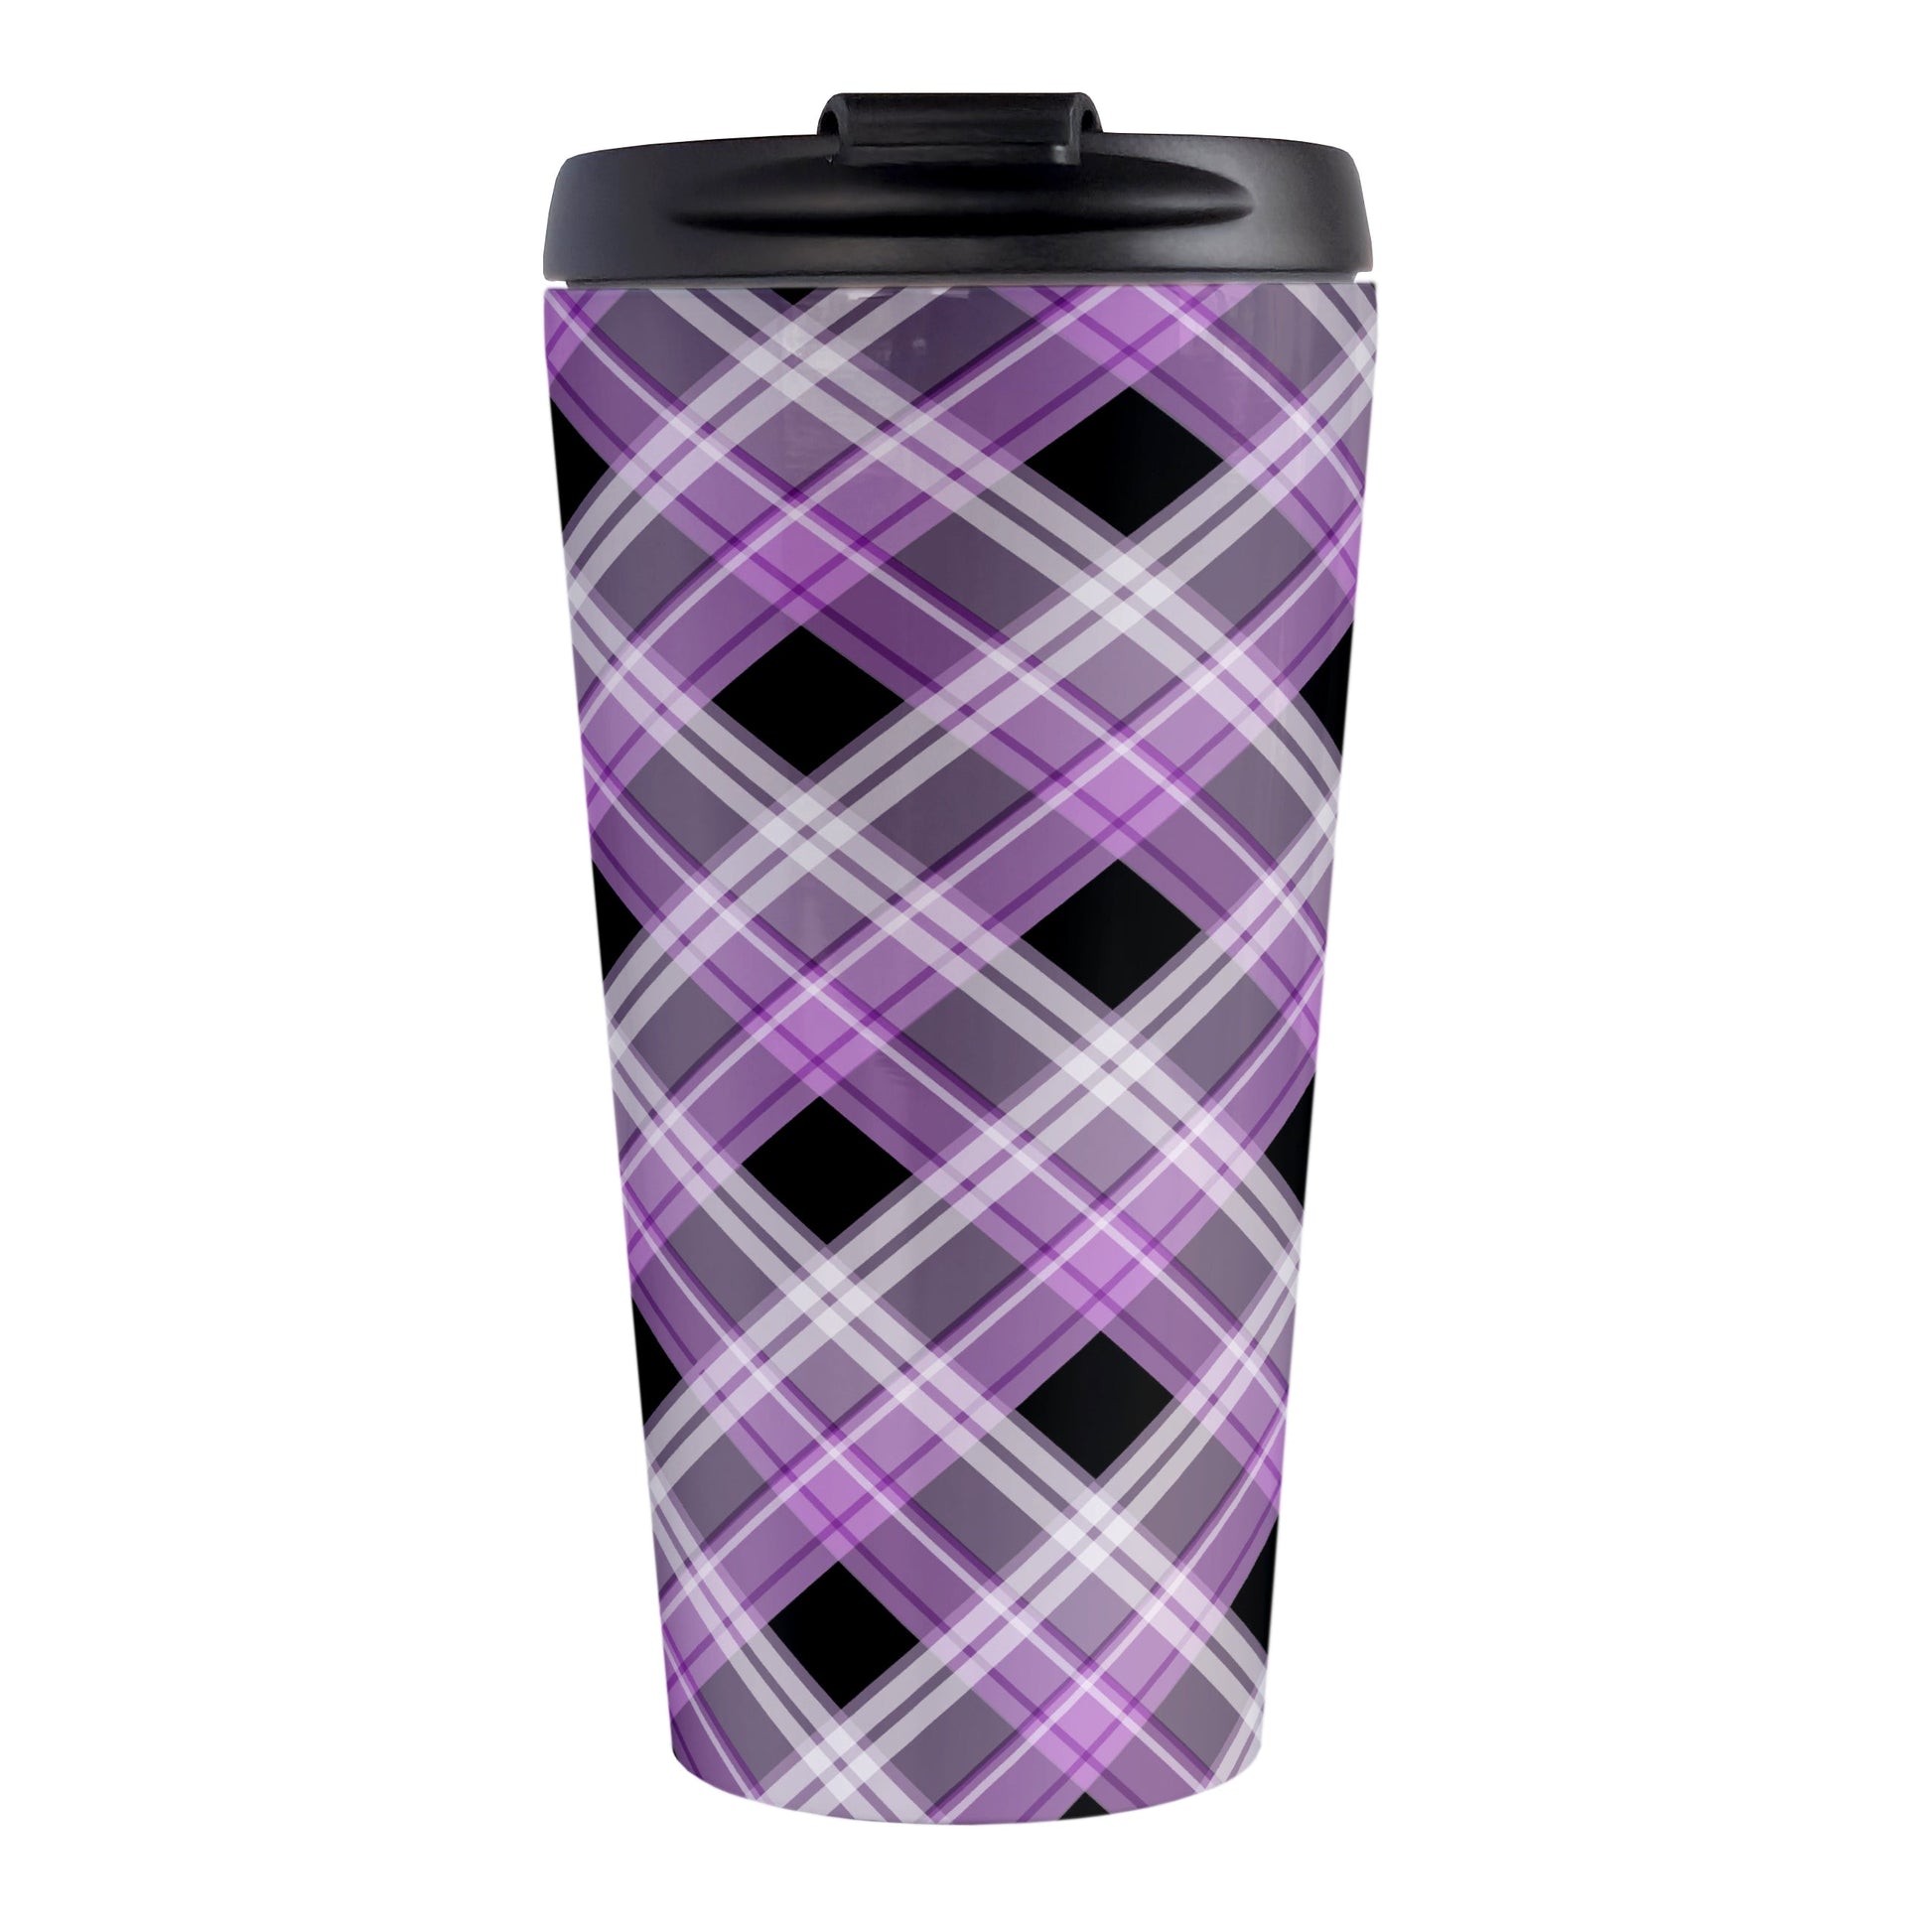 Alternative Purple Plaid Travel Mug (15oz) at Amy's Coffee Mugs. A stainless steel travel mug designed with a diagonal purple, black, and white plaid pattern that wraps around the mug. Designed for someone who likes plaid patterns and loves the color purple.